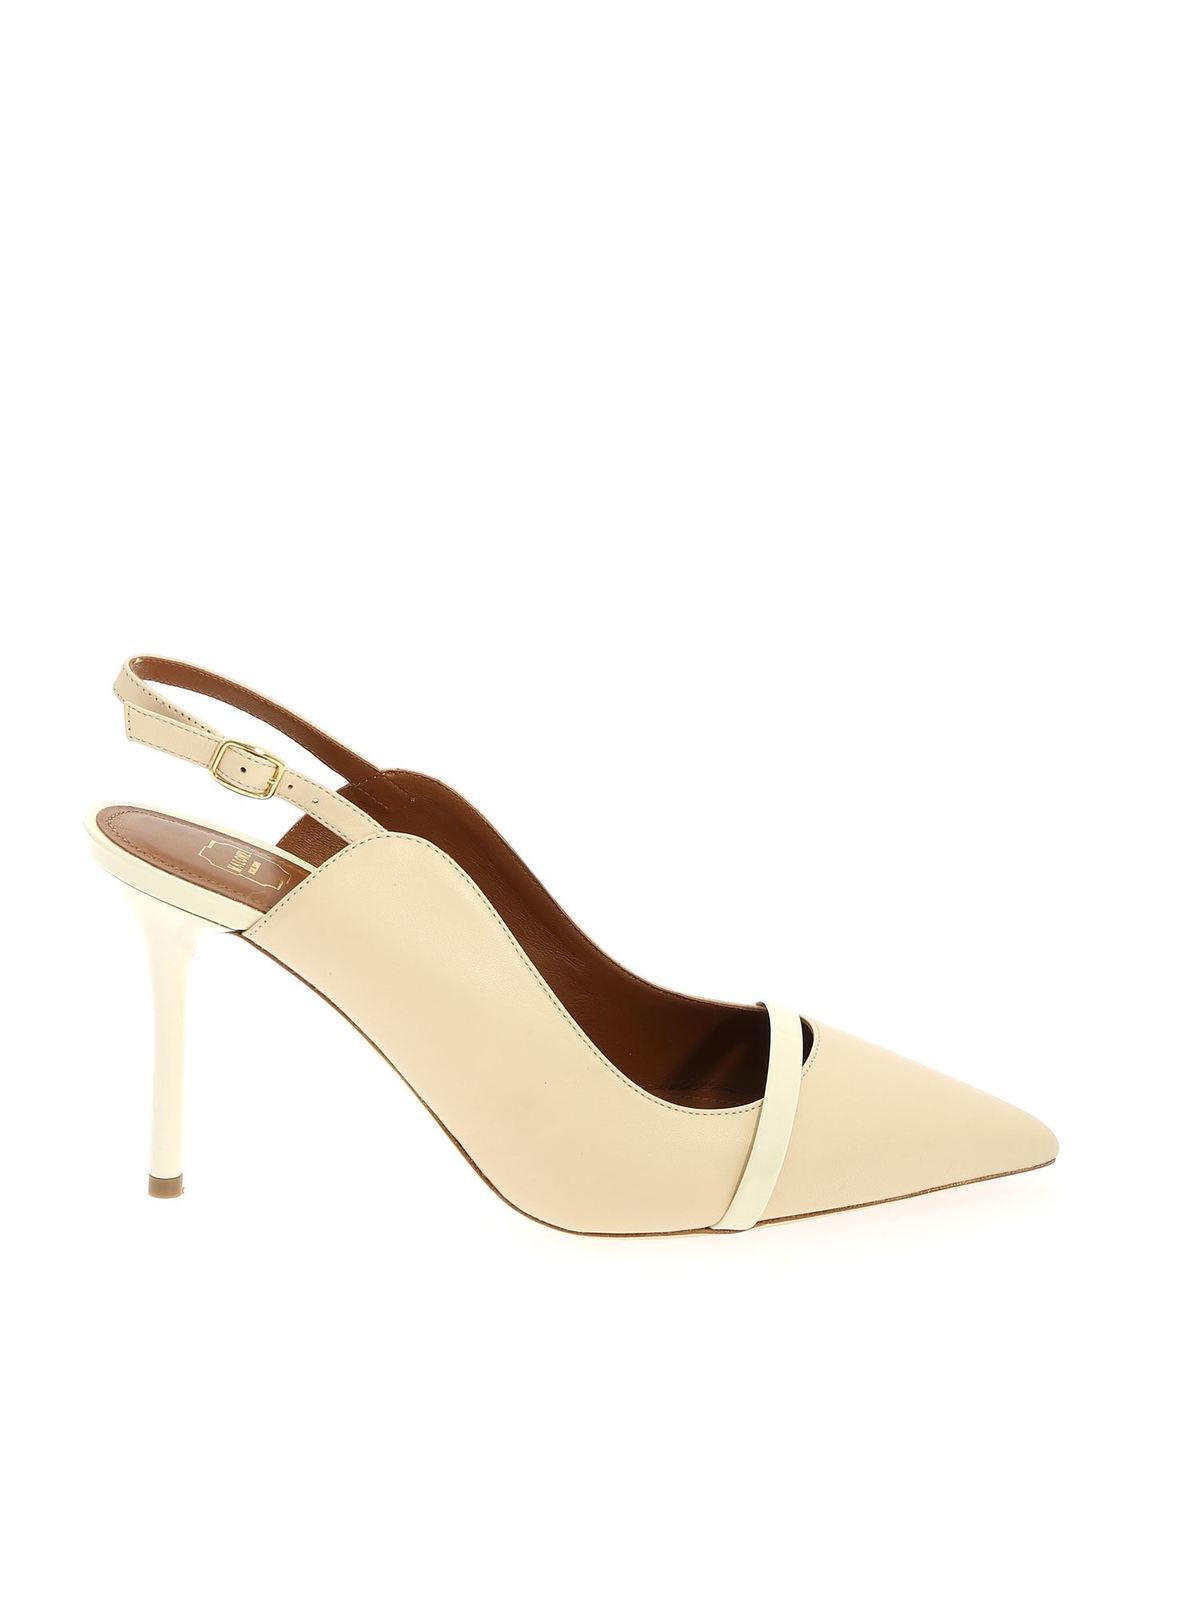 MALONE SOULIERS MARION PUMPS IN NUDE COLOR